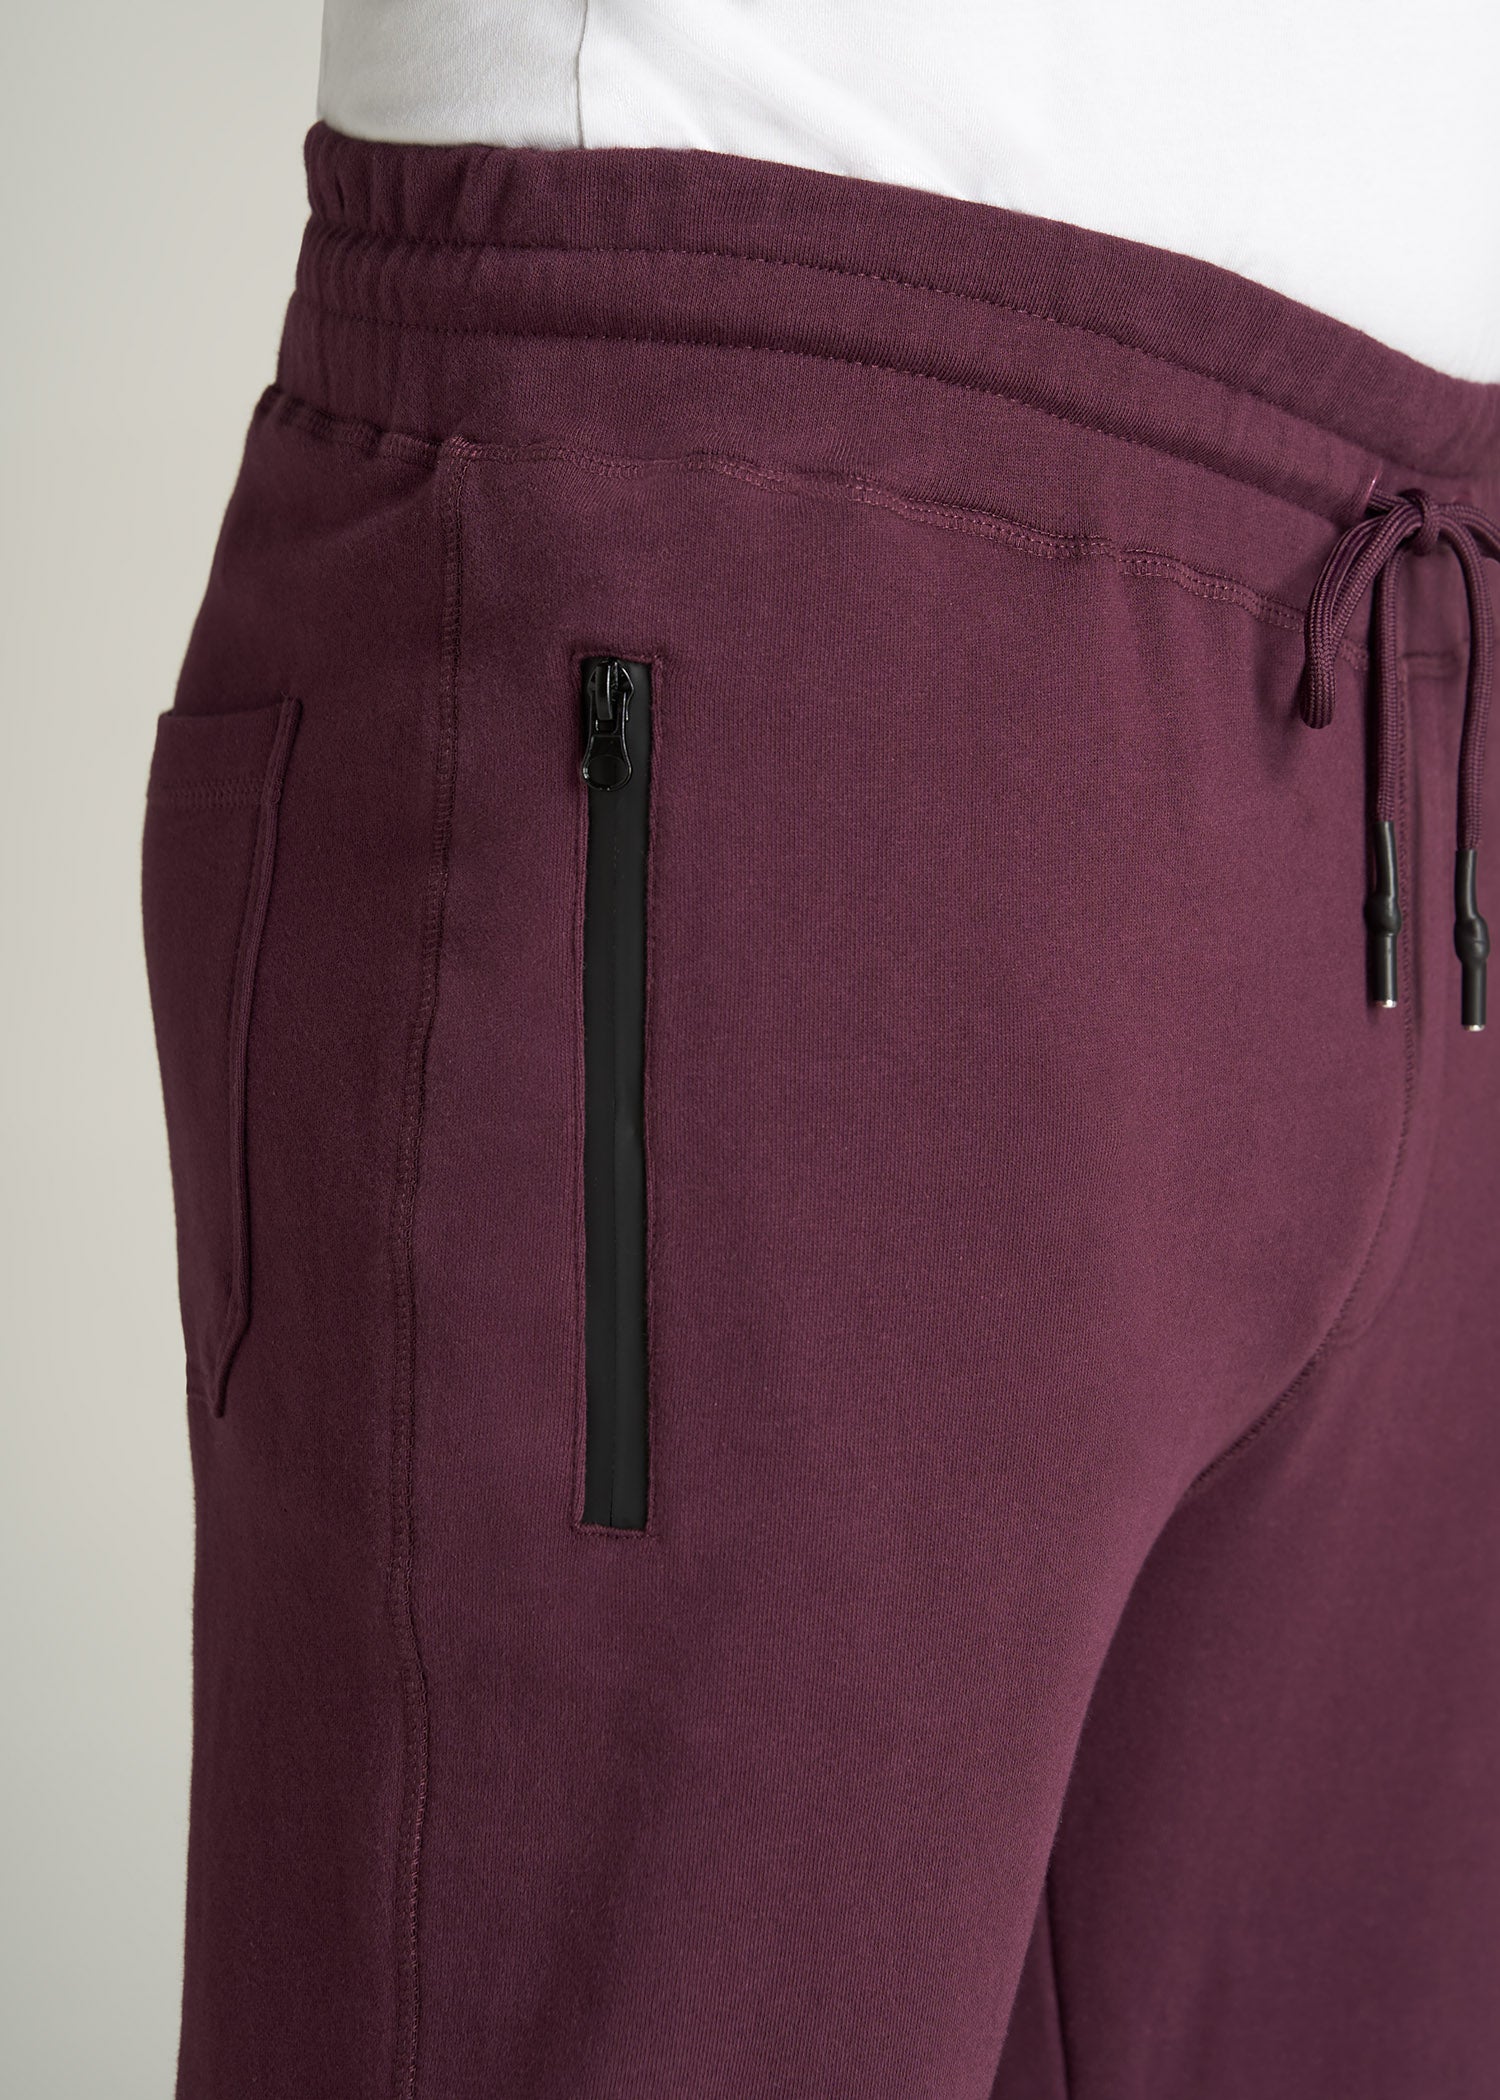    American-Tall-Men-80-20-FrenchTerry-Jogger-Maroon-detail